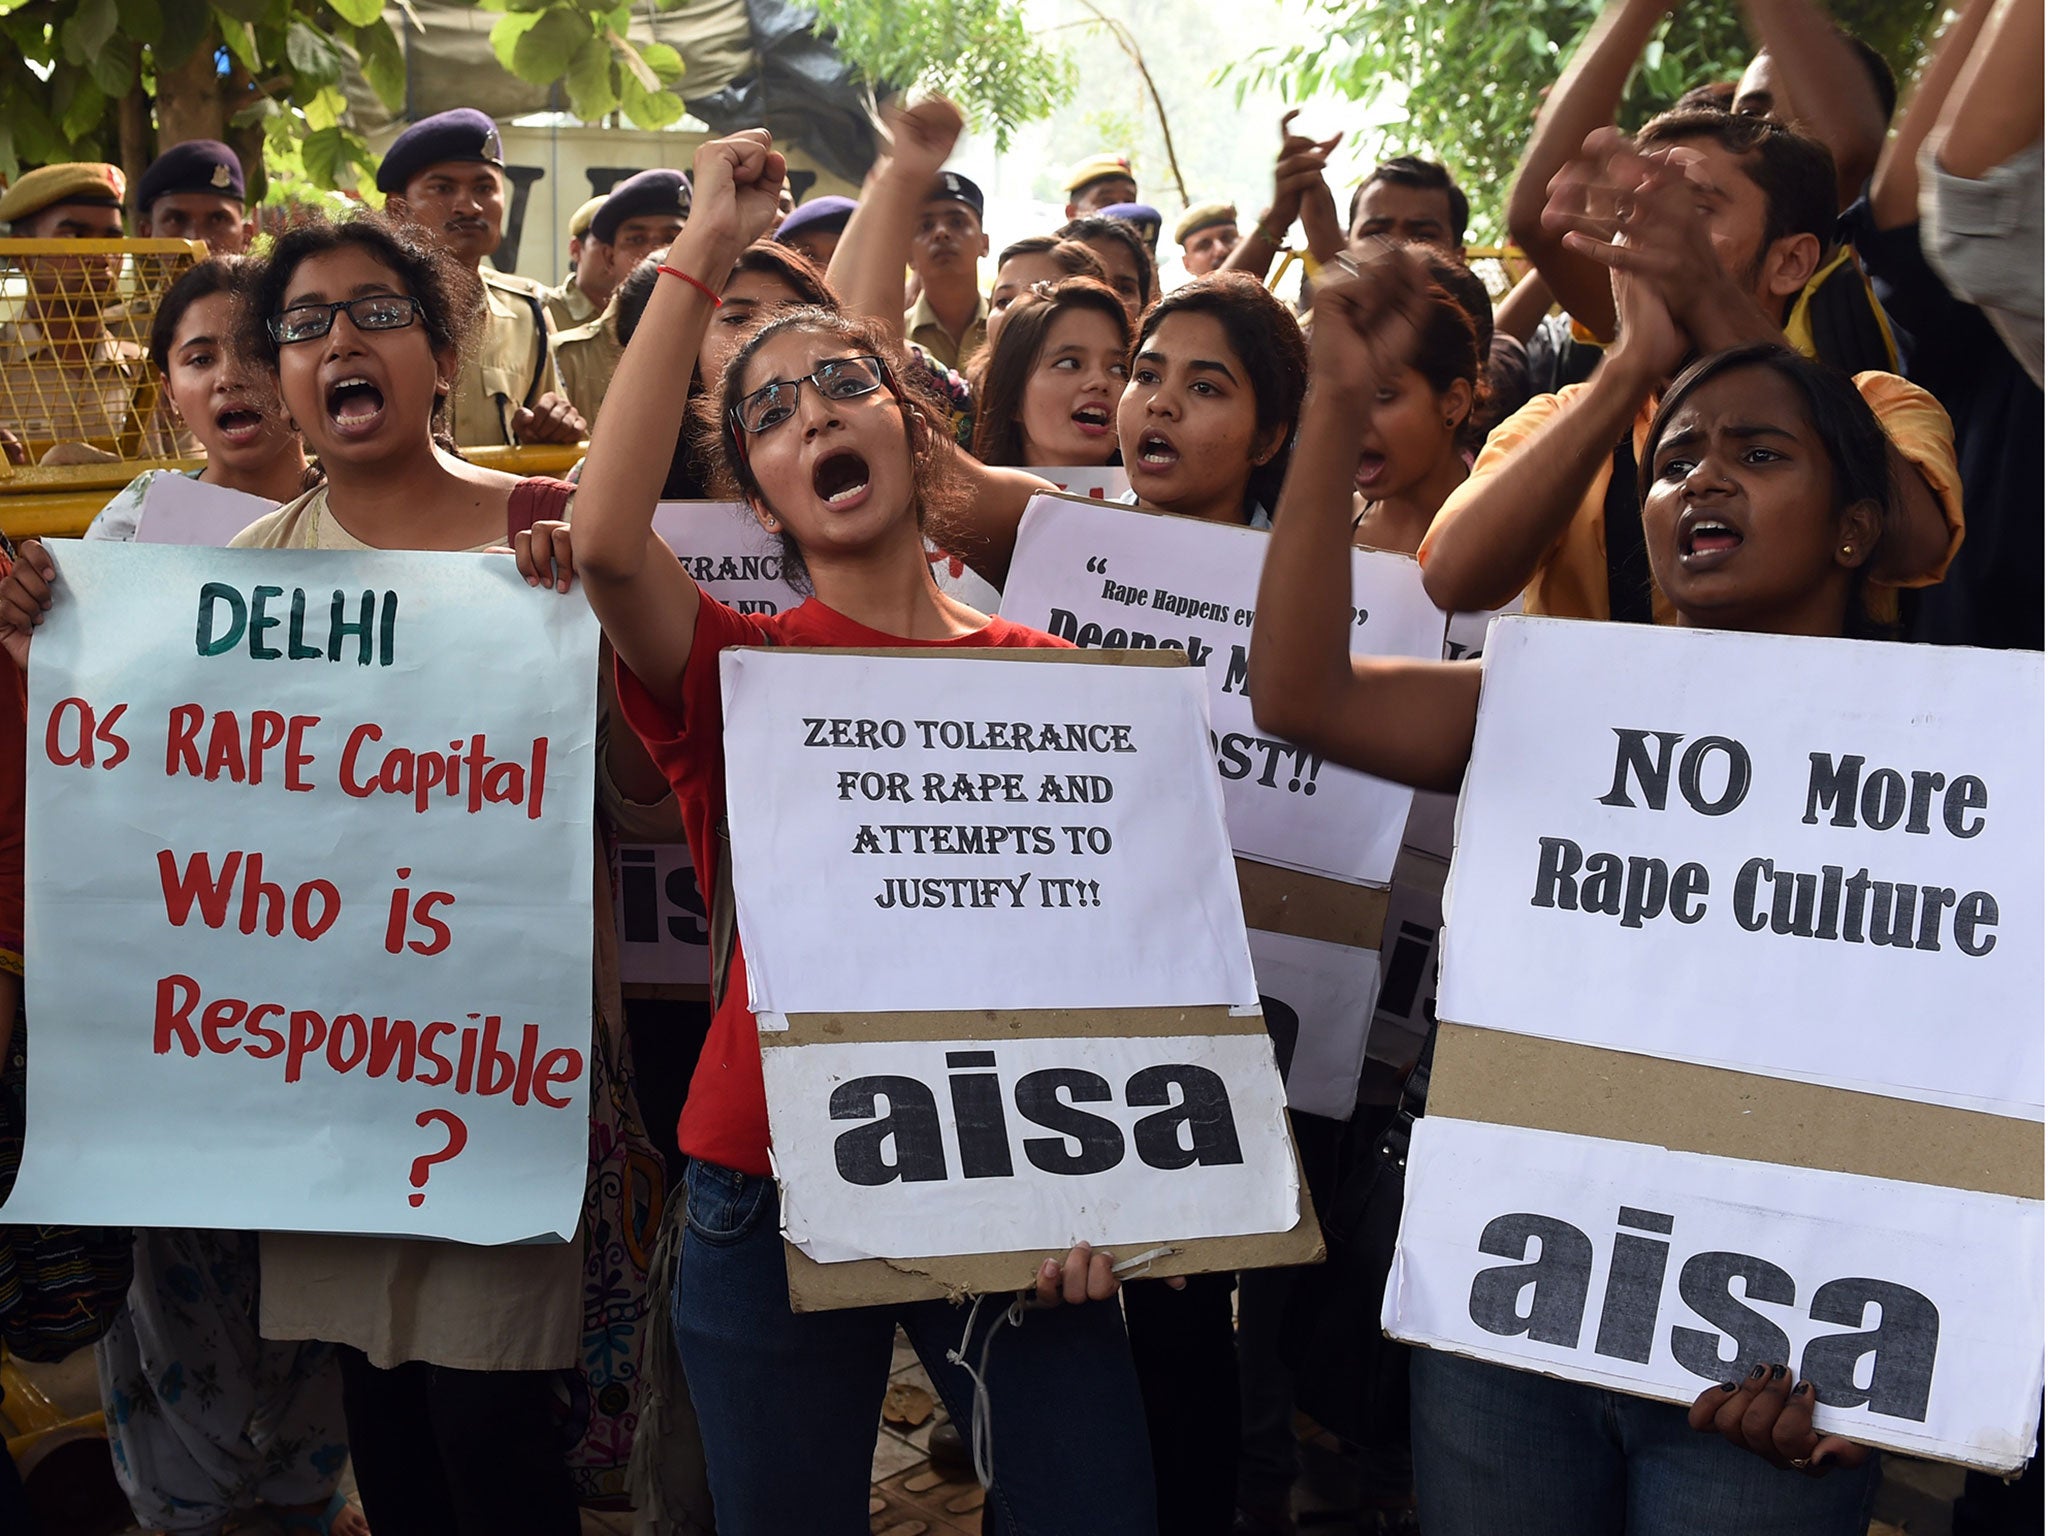 Indian students shout slogans during a protest against the rapes of two minor girls outside the police headquarters in New Delhi on 18 October, 2015